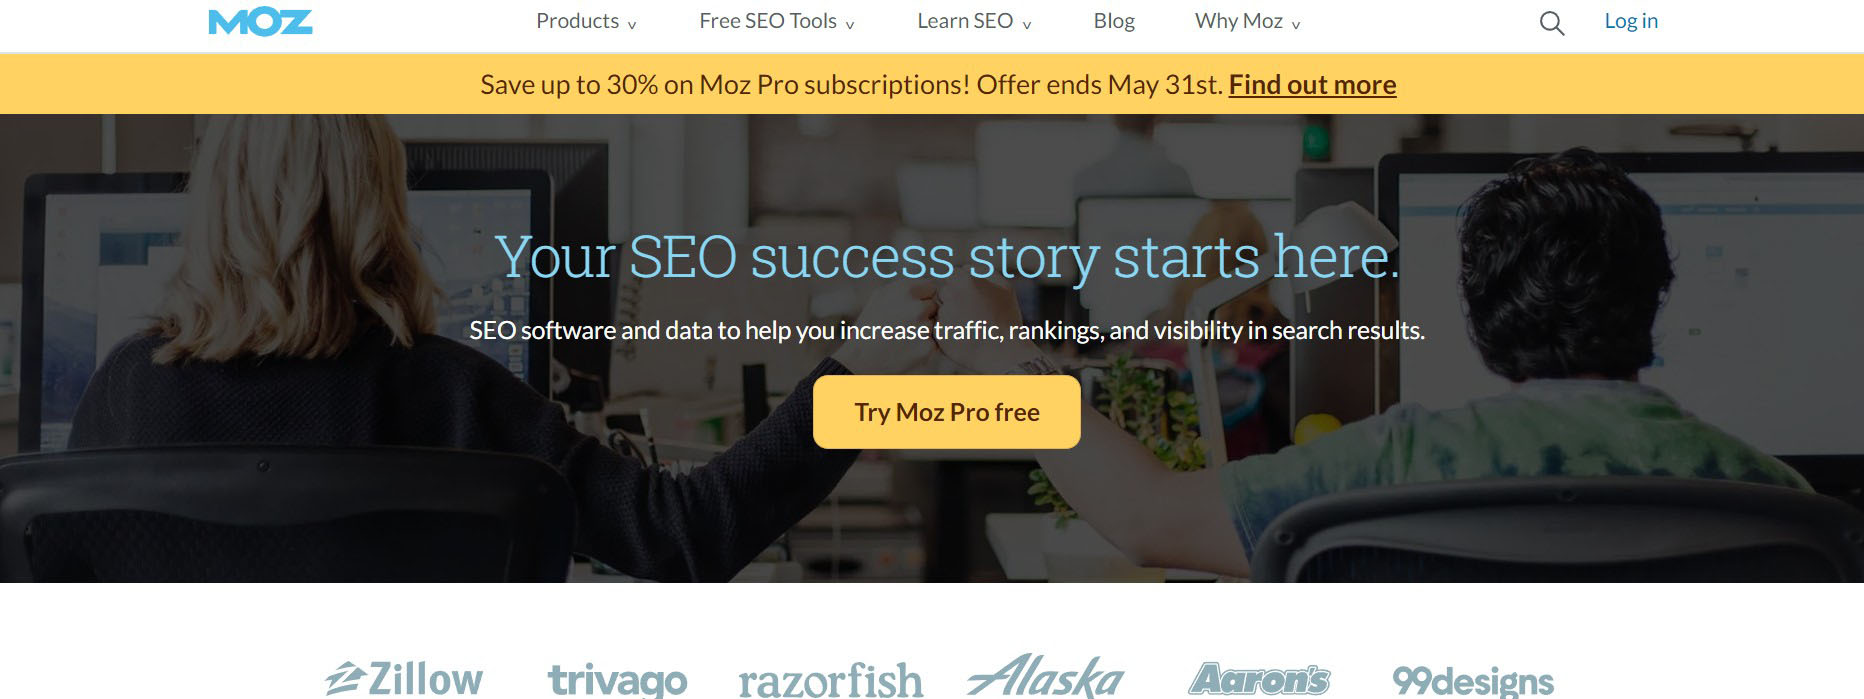 20+ Best SEO Promotion Tools to Use in 2023 4